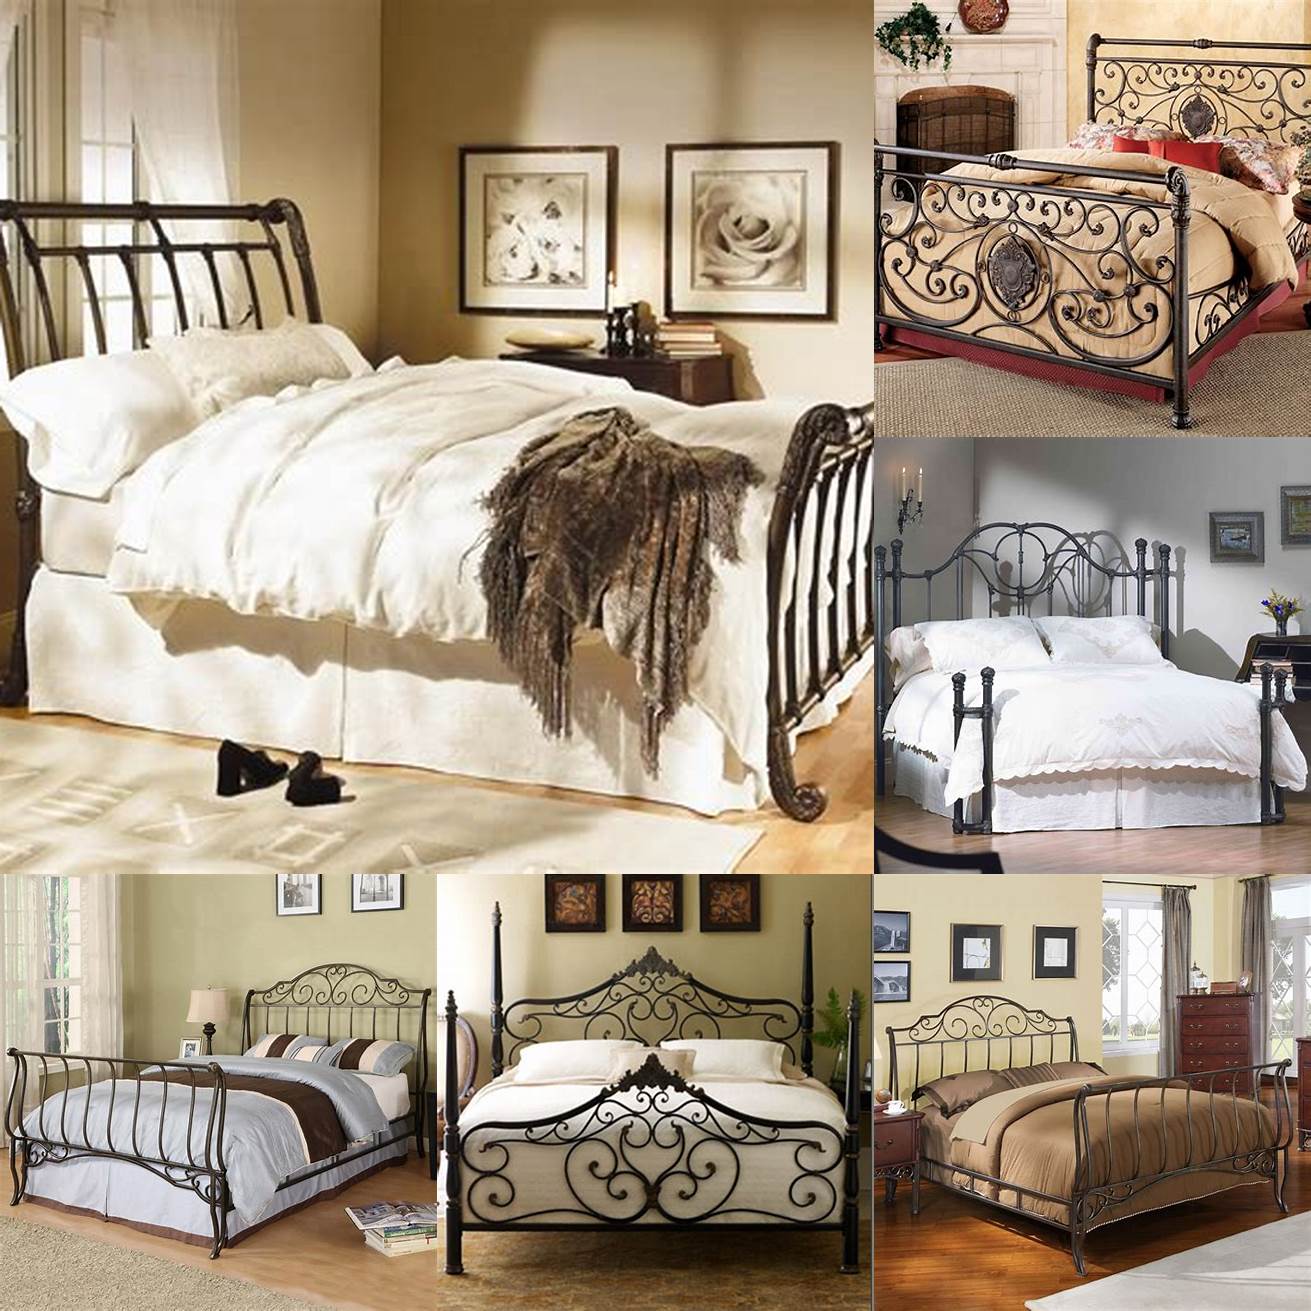 Sleigh iron bed frame queen with pastel bedding and floral wallpaper